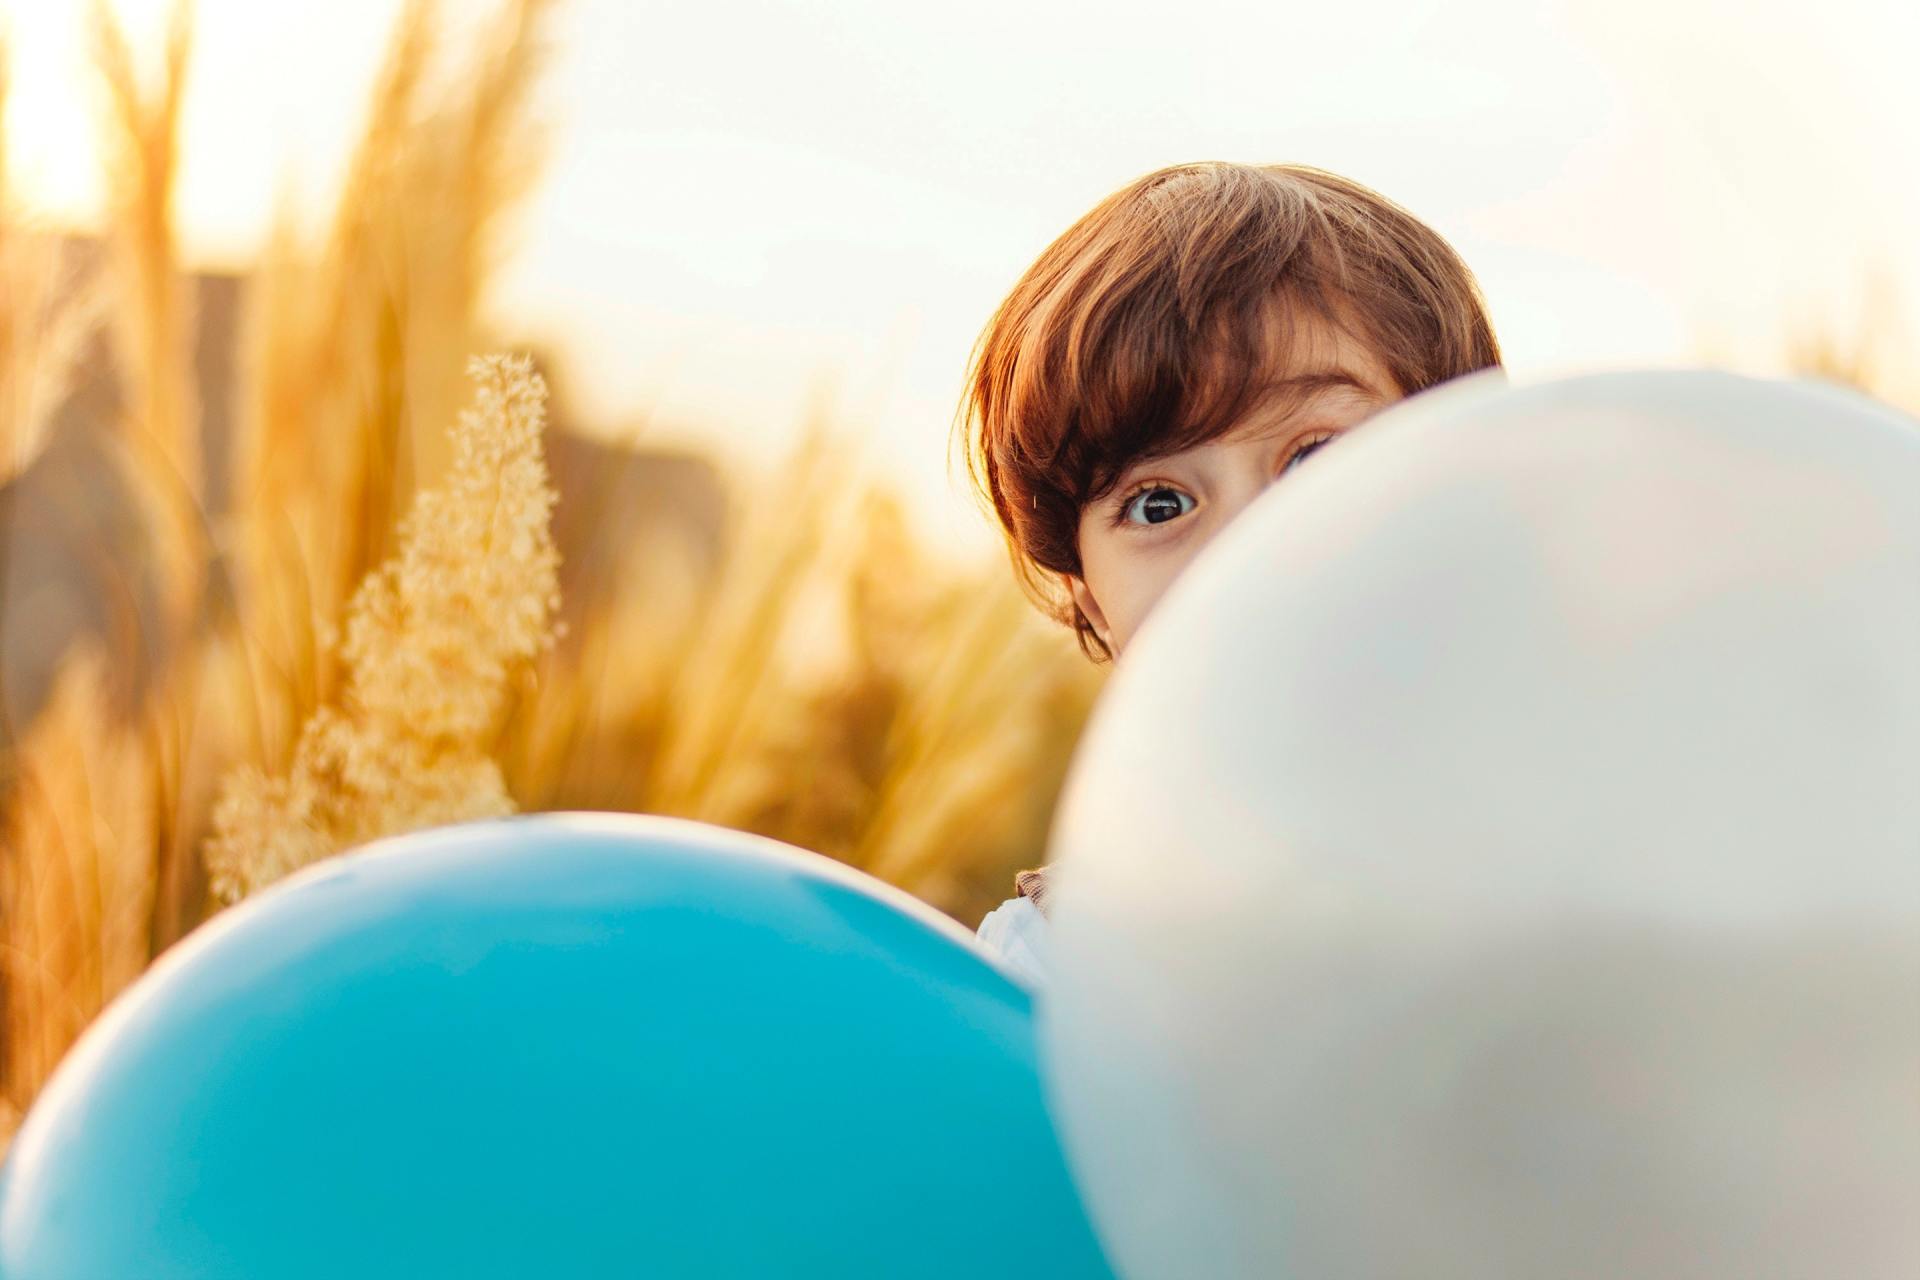 Child peeking out from behind balloons